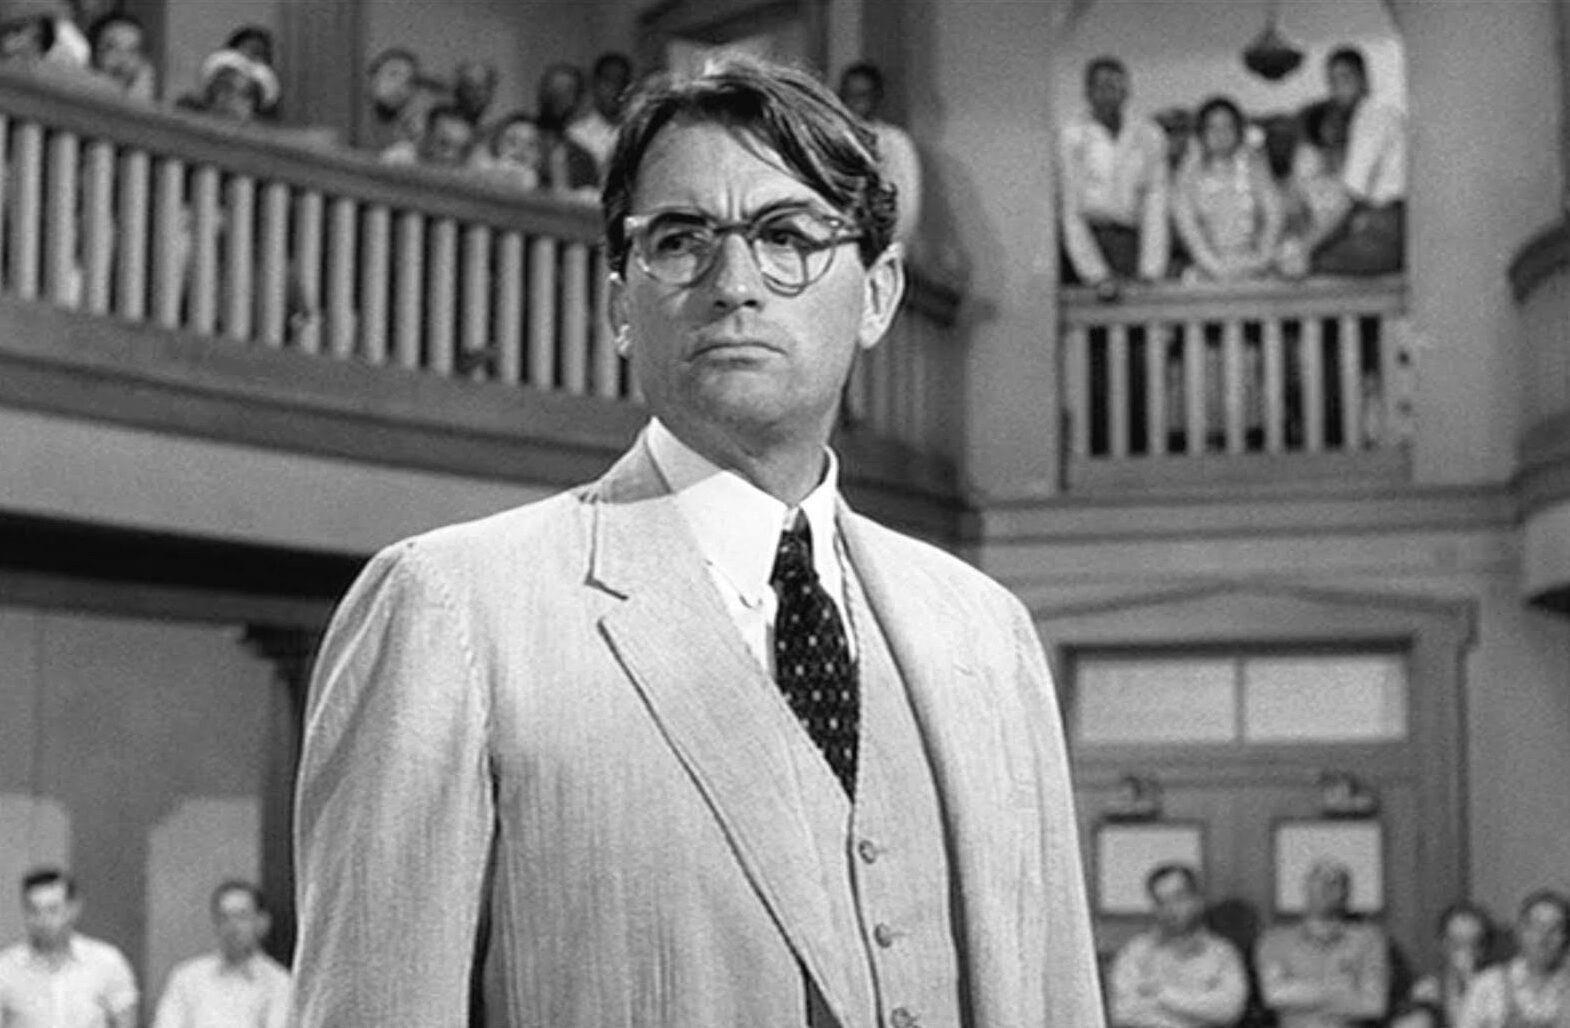 <ul> <li><strong>Speech topic:</strong> Believing Tom Robinson</li> <li><strong>Delivered by:</strong> Atticus Finch, played by Gregory Peck</li> </ul> <p>This Oscar-winning adaptation of Harper Lee's timeless novel tells the story of Southern Black man Tom Robinson who stands falsely accused of rape. Defense attorney Atticus Finch draws attention to the country's moral values and its racial biases alike in his closing argument. "In the name of God, believe Tom Robinson" are his final words.</p>